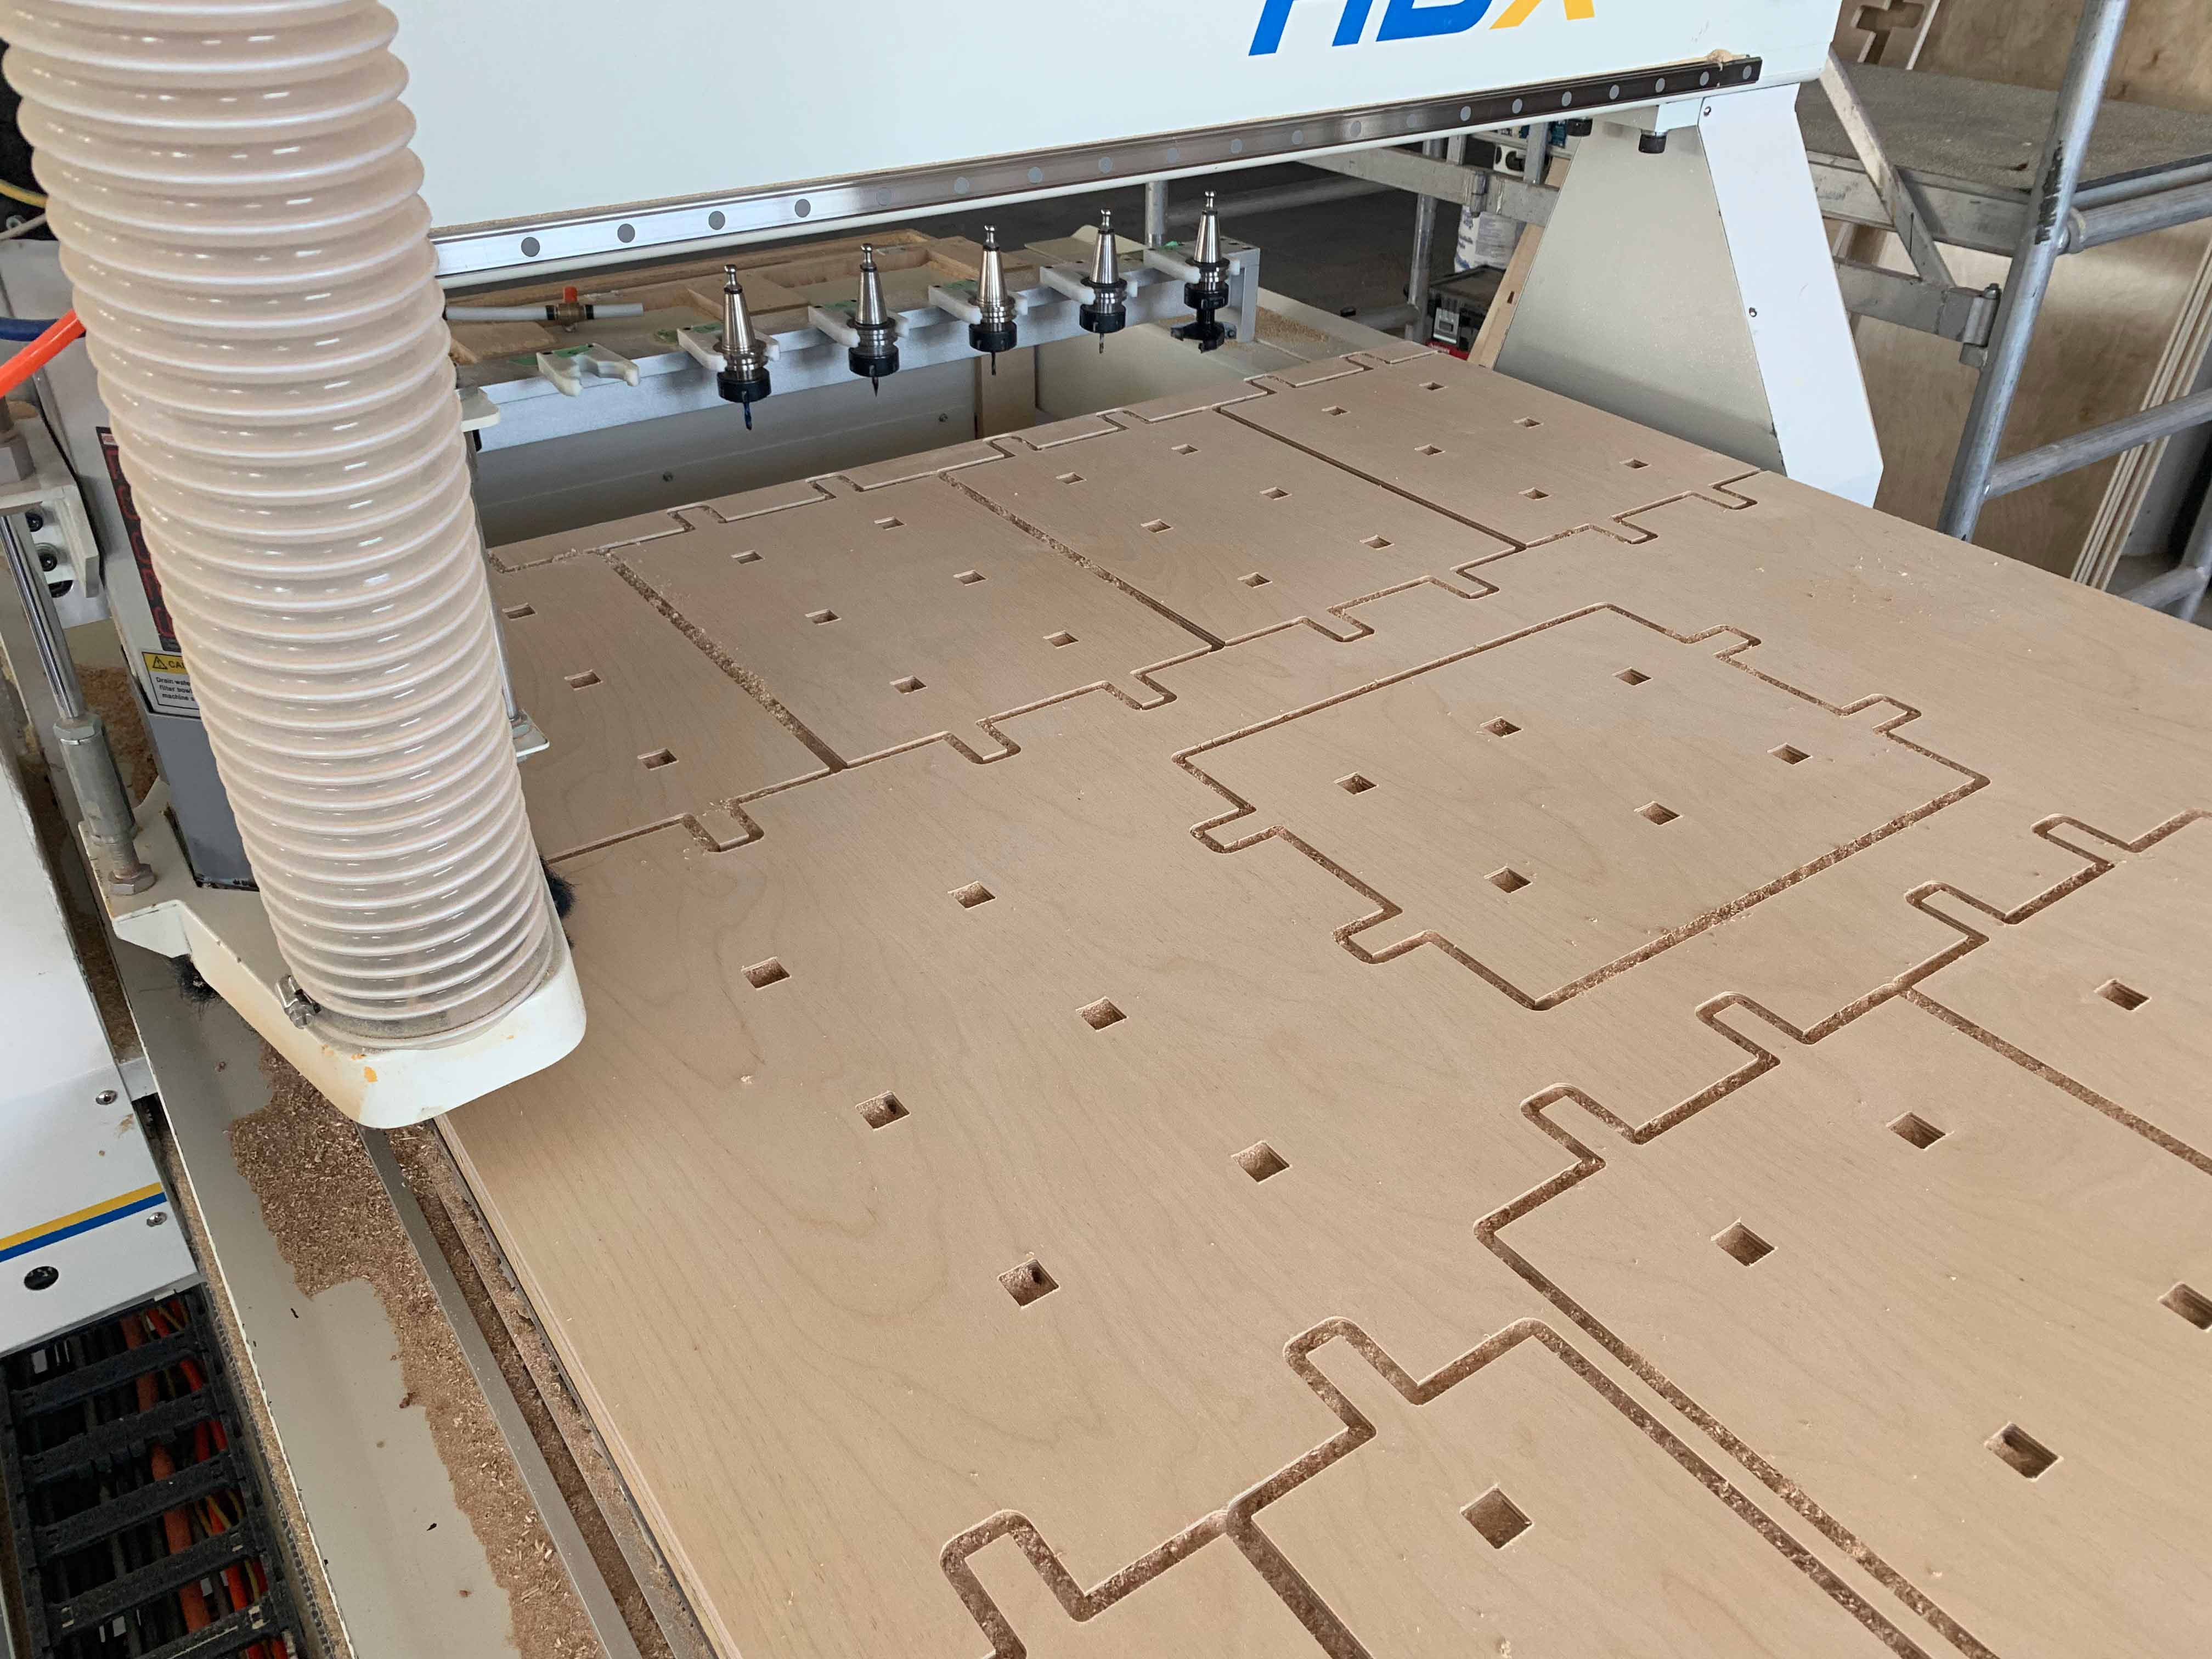 Wood panels being cut on the CNC machine